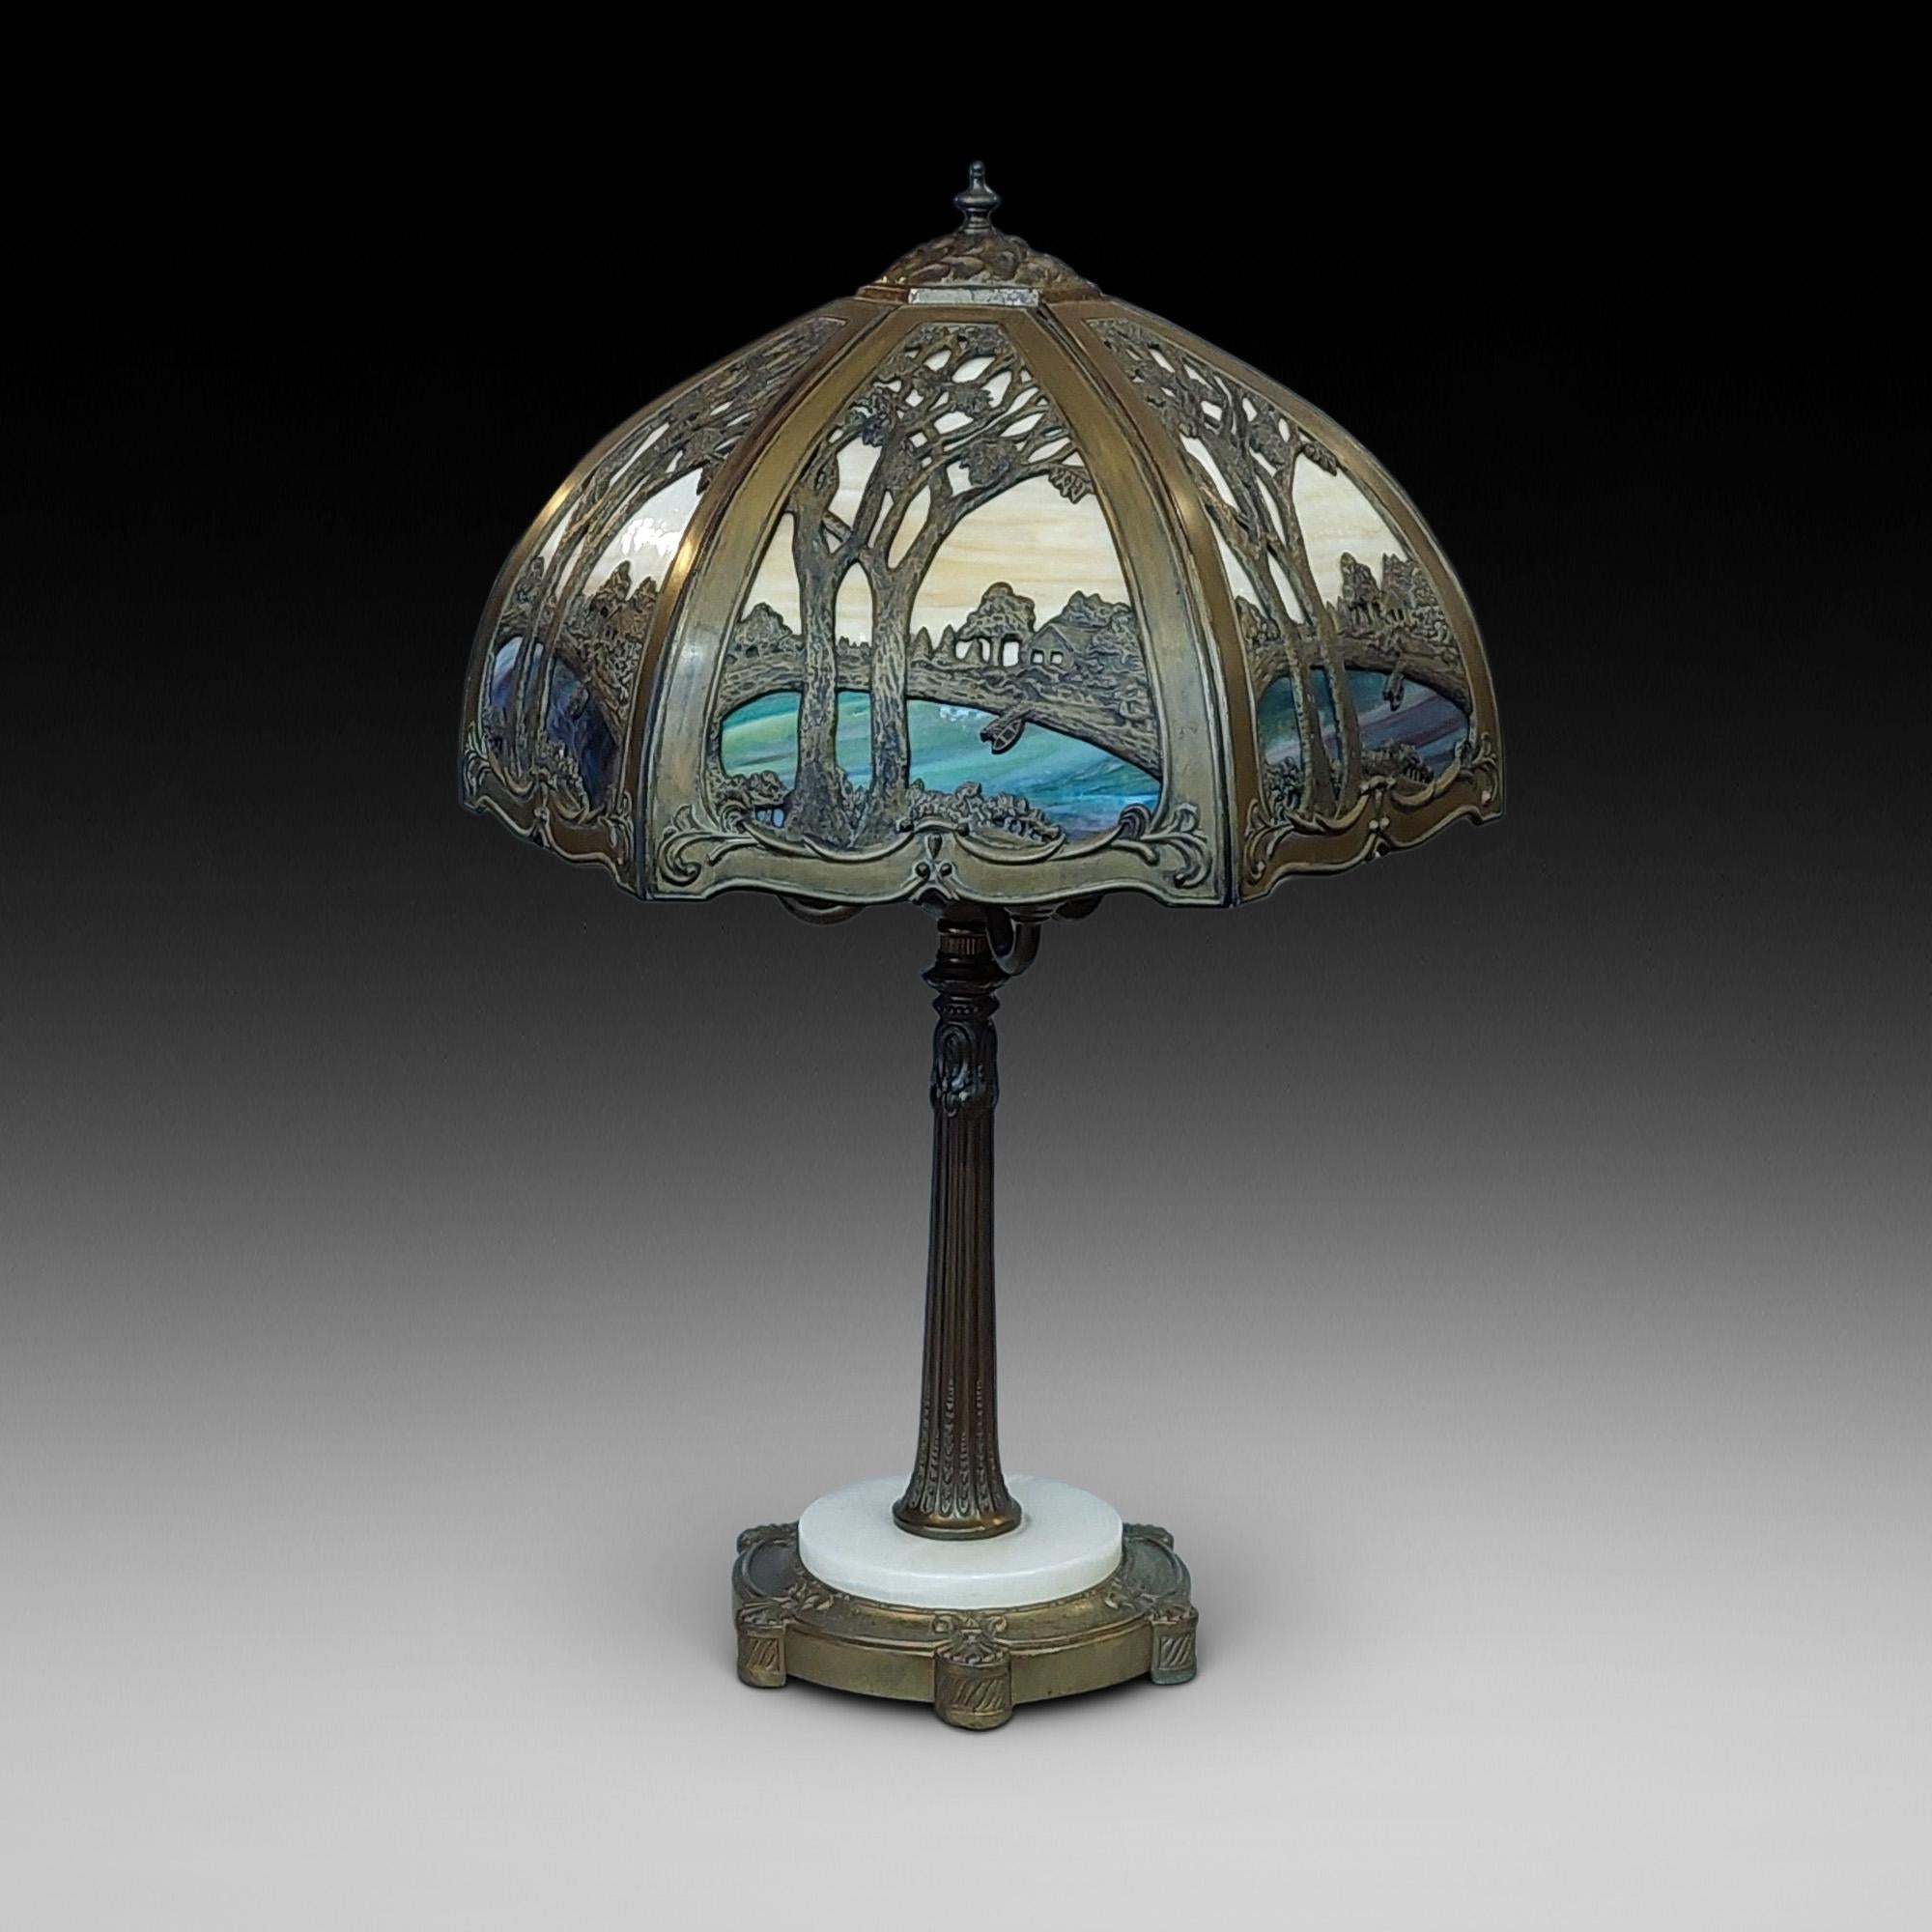 Mid Century Stained Glass Table Lamp, in Galle Art Nouveau Style, the shade worked with landscapes over a gilded spelter reeded column base with three lamps - ArtCraft - New York - founded 1955 - 19